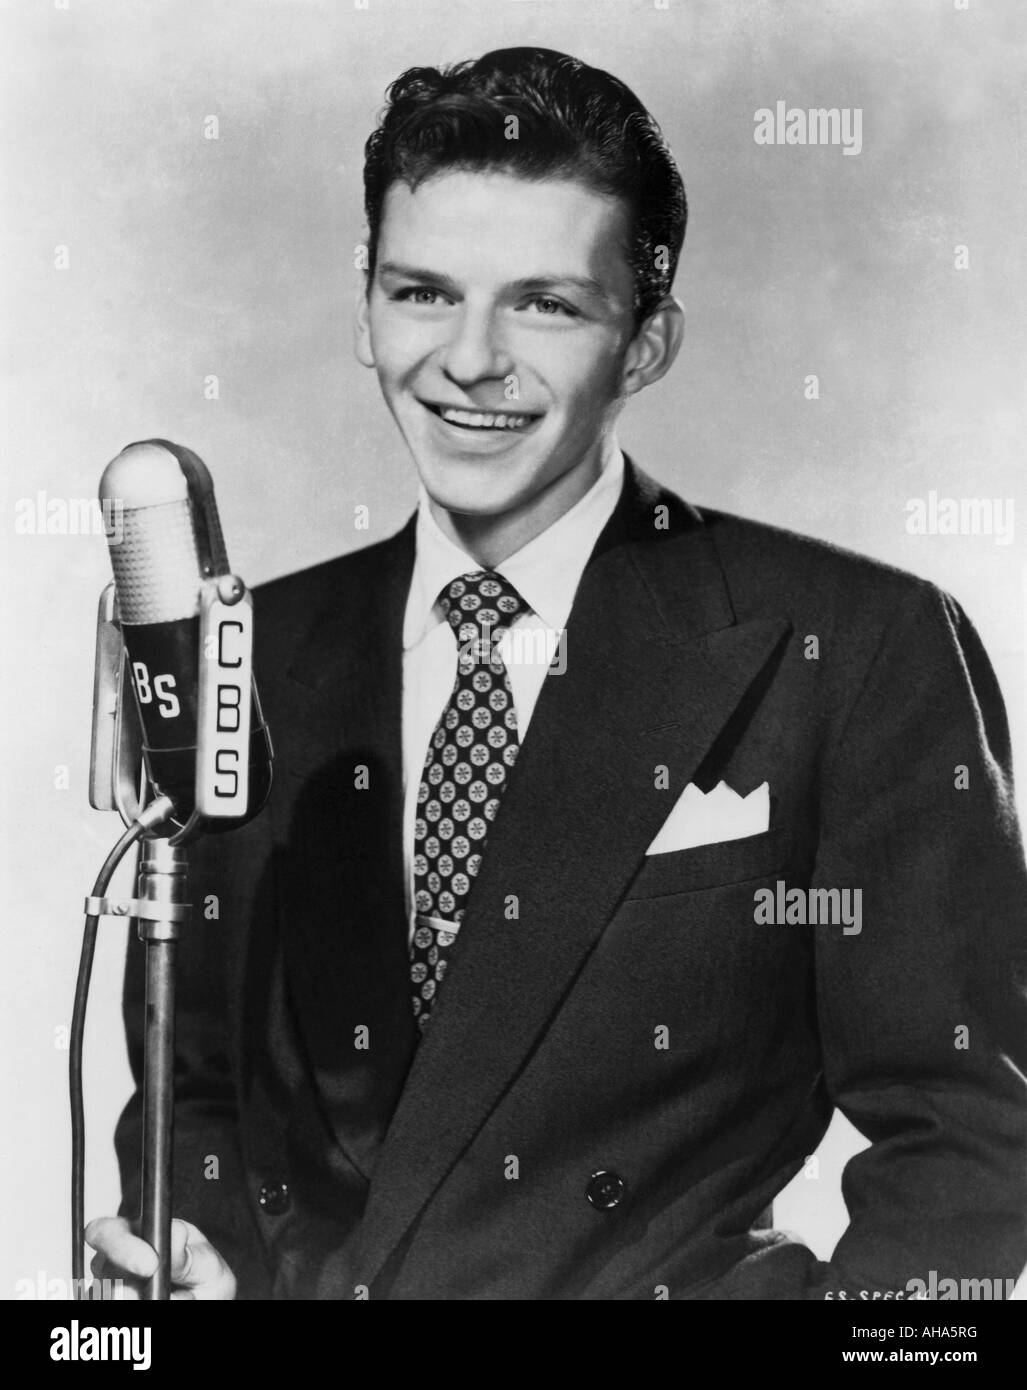 FRANK SINATRA US singer about 1943 Stock Photo - Alamy